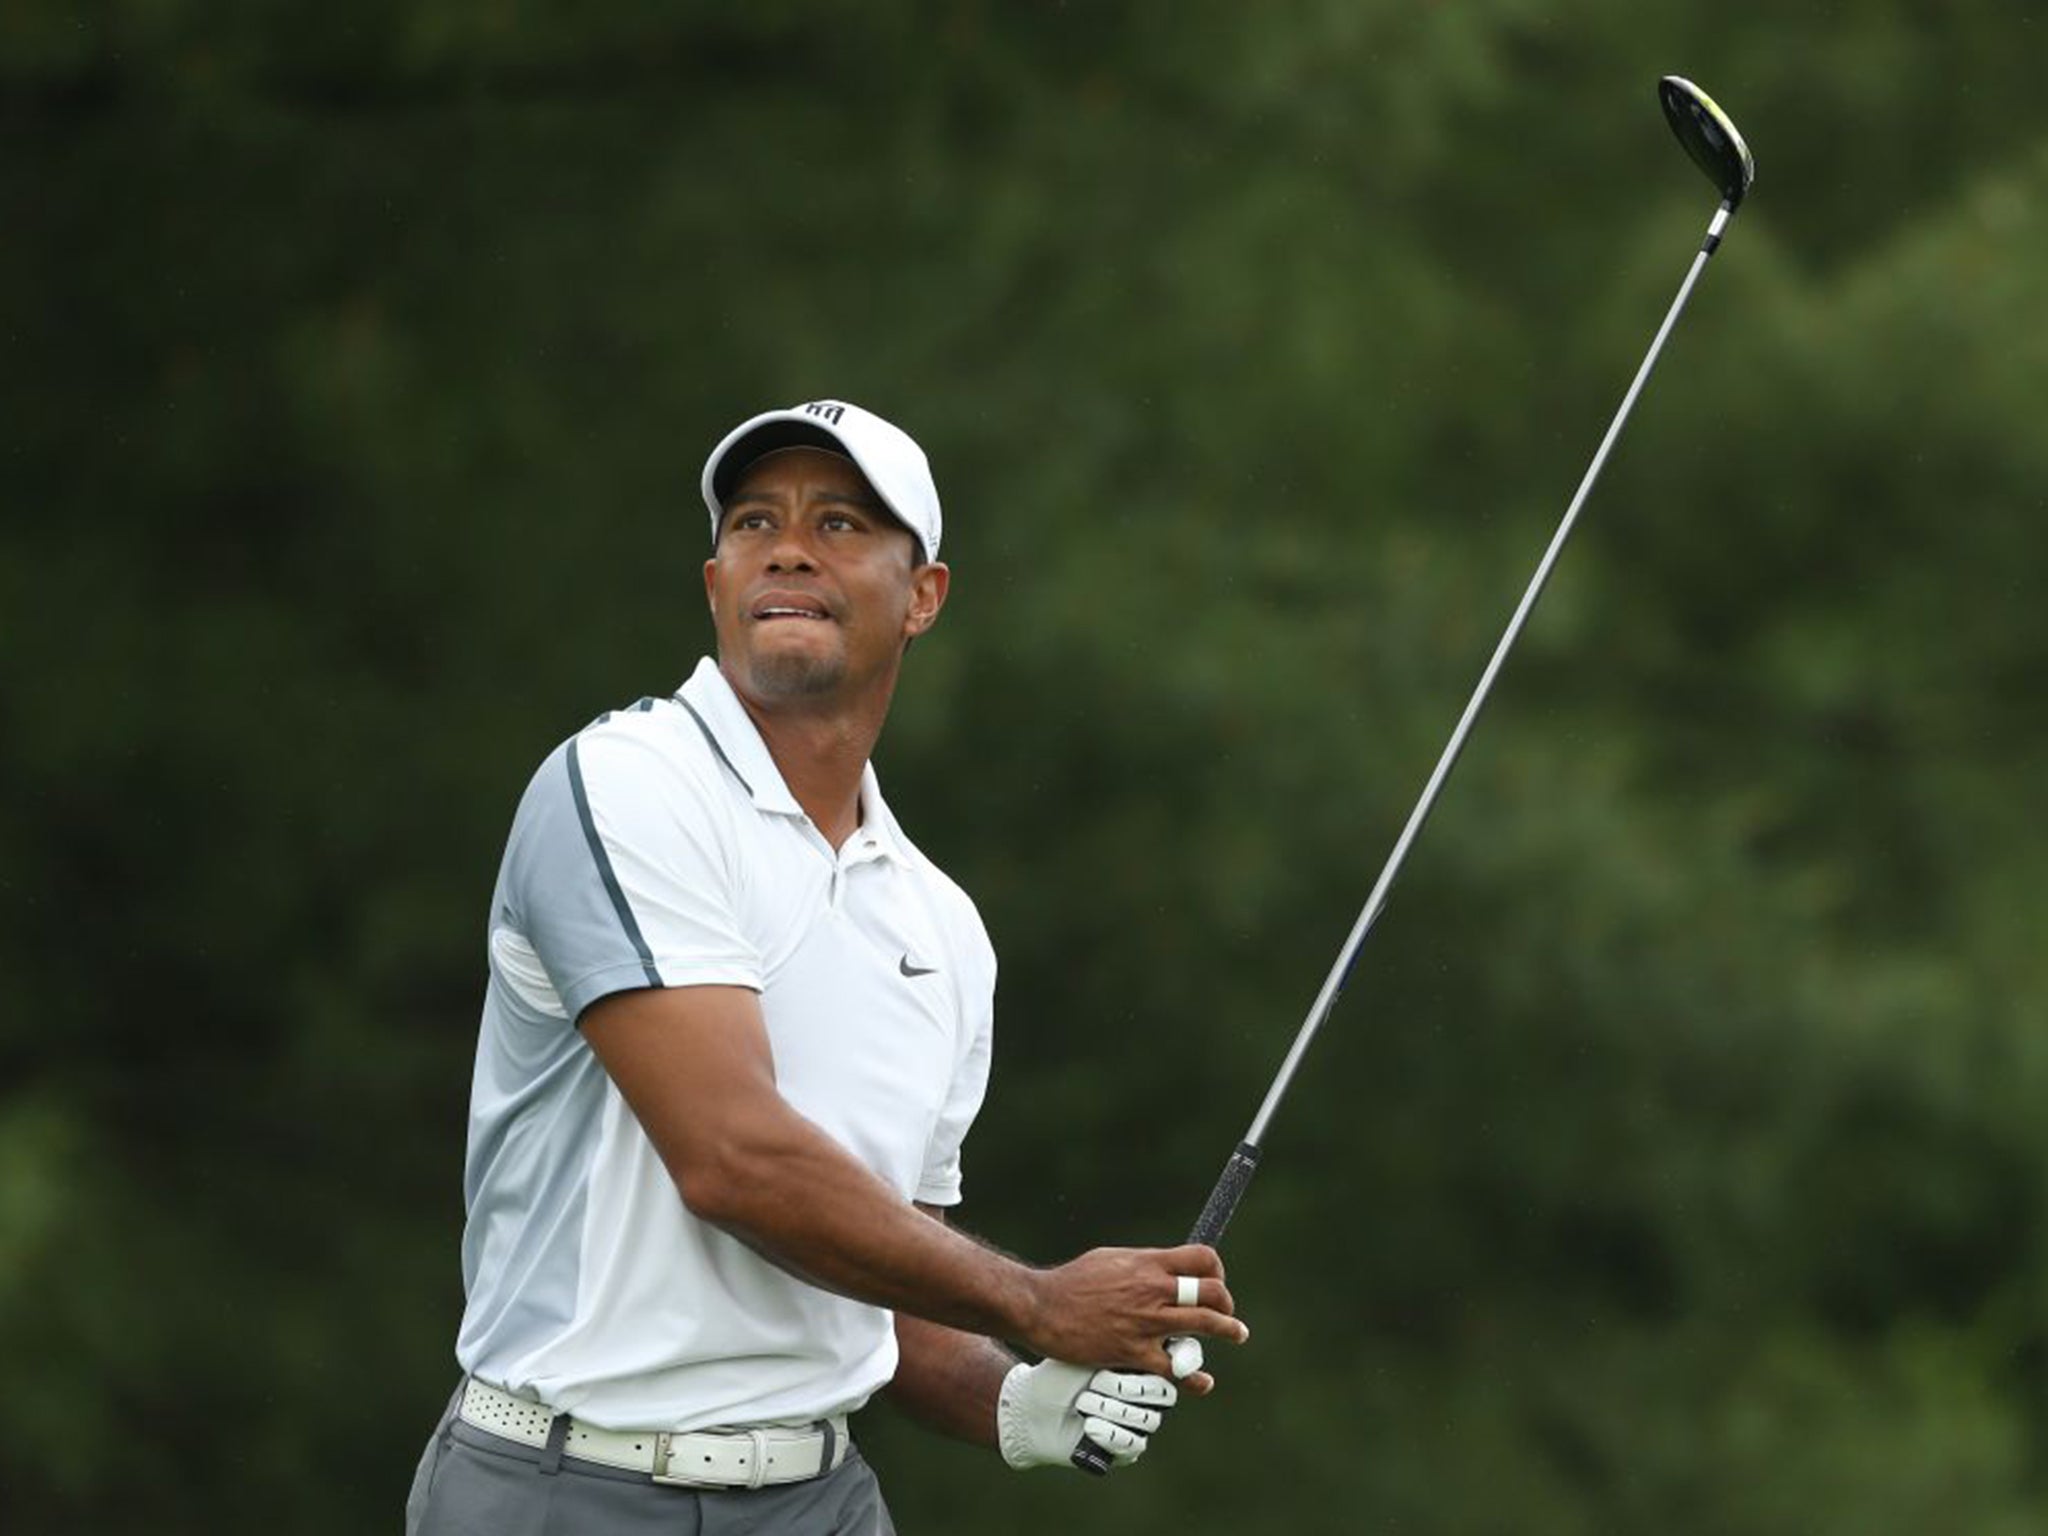 Tiger Woods finished on one over par after a terrible start